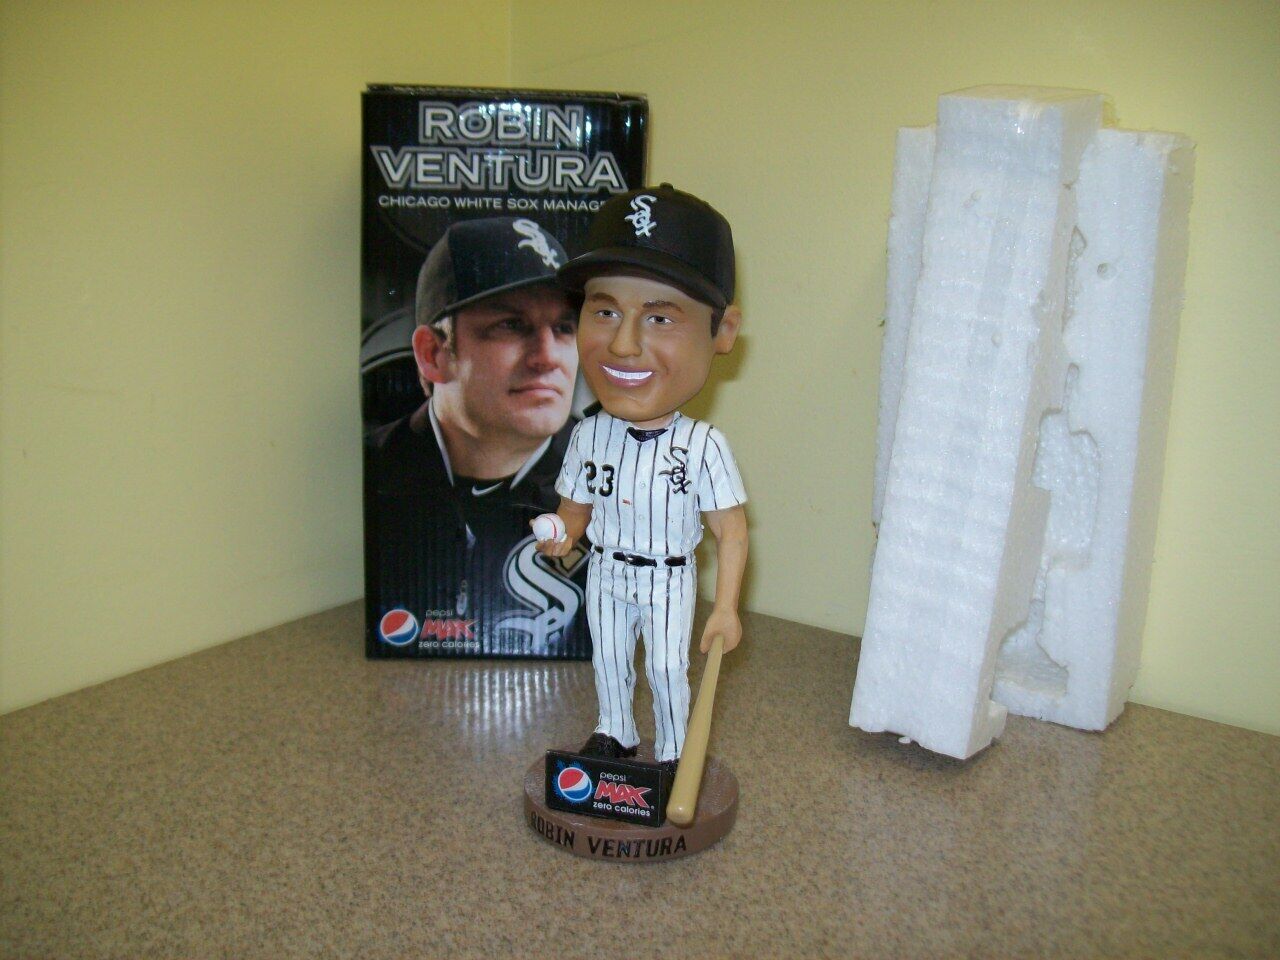 Robin Ventura #23 Chicago White Sox Manager Bobblehead By Alexander Global